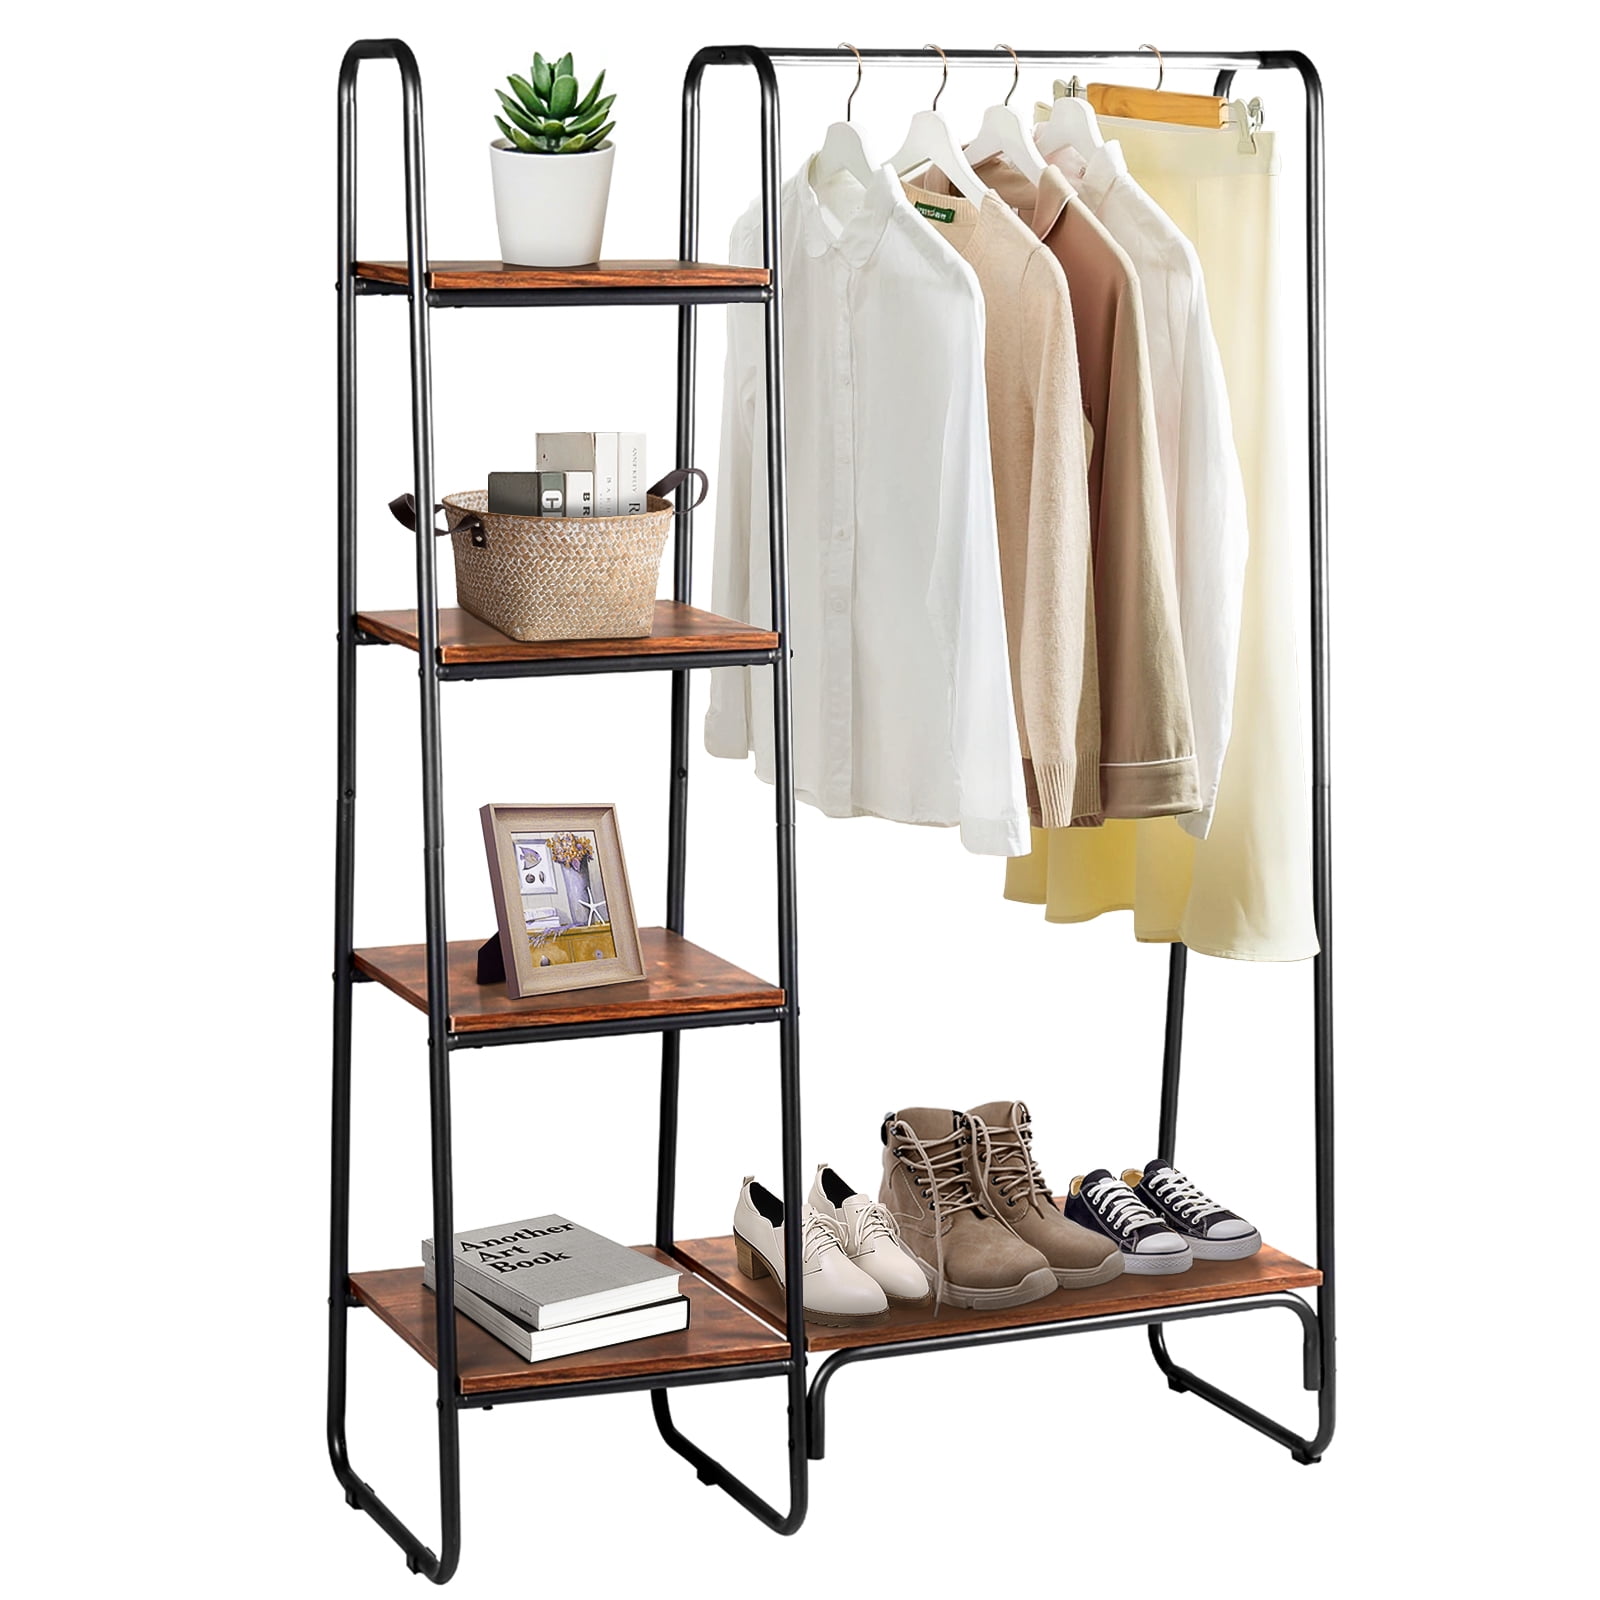 Lusimo Clothes Rack Tiers Clothing Rack With Shelves Heavy Duty Garment ...